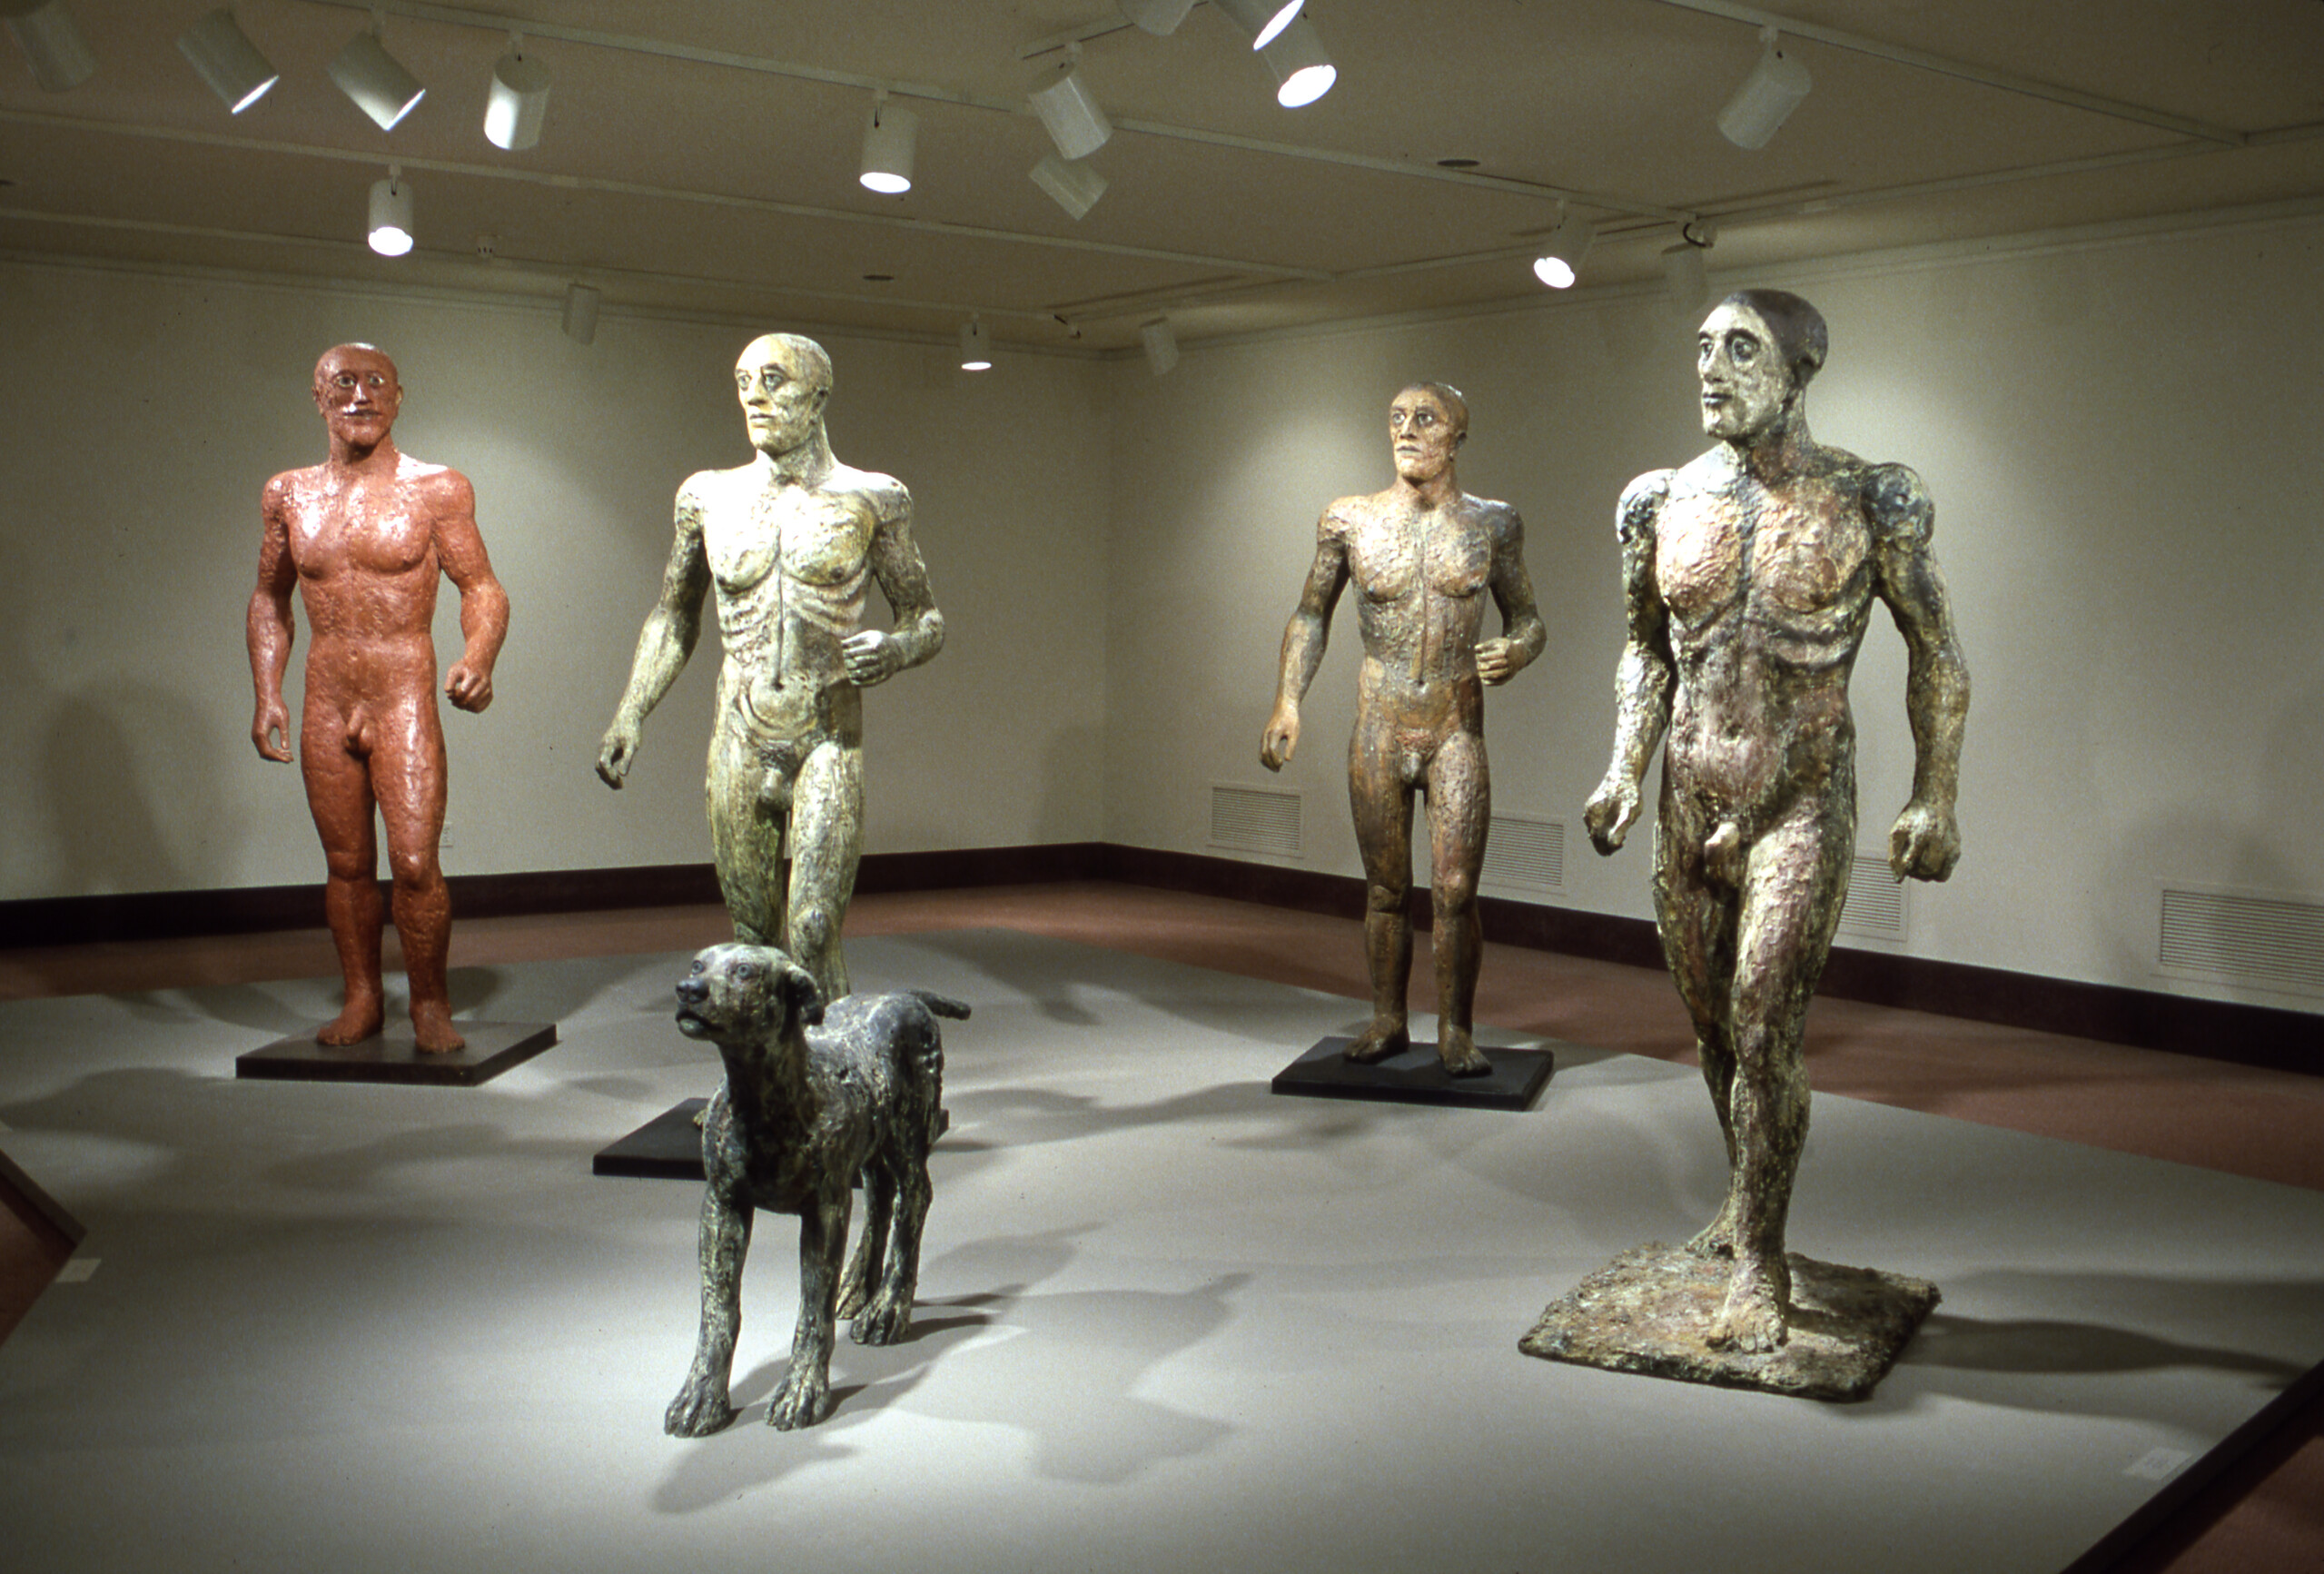 A view of a gallery space. Four tall sculptures of men seem to be running through the gallery. A dog is walking in front of them.